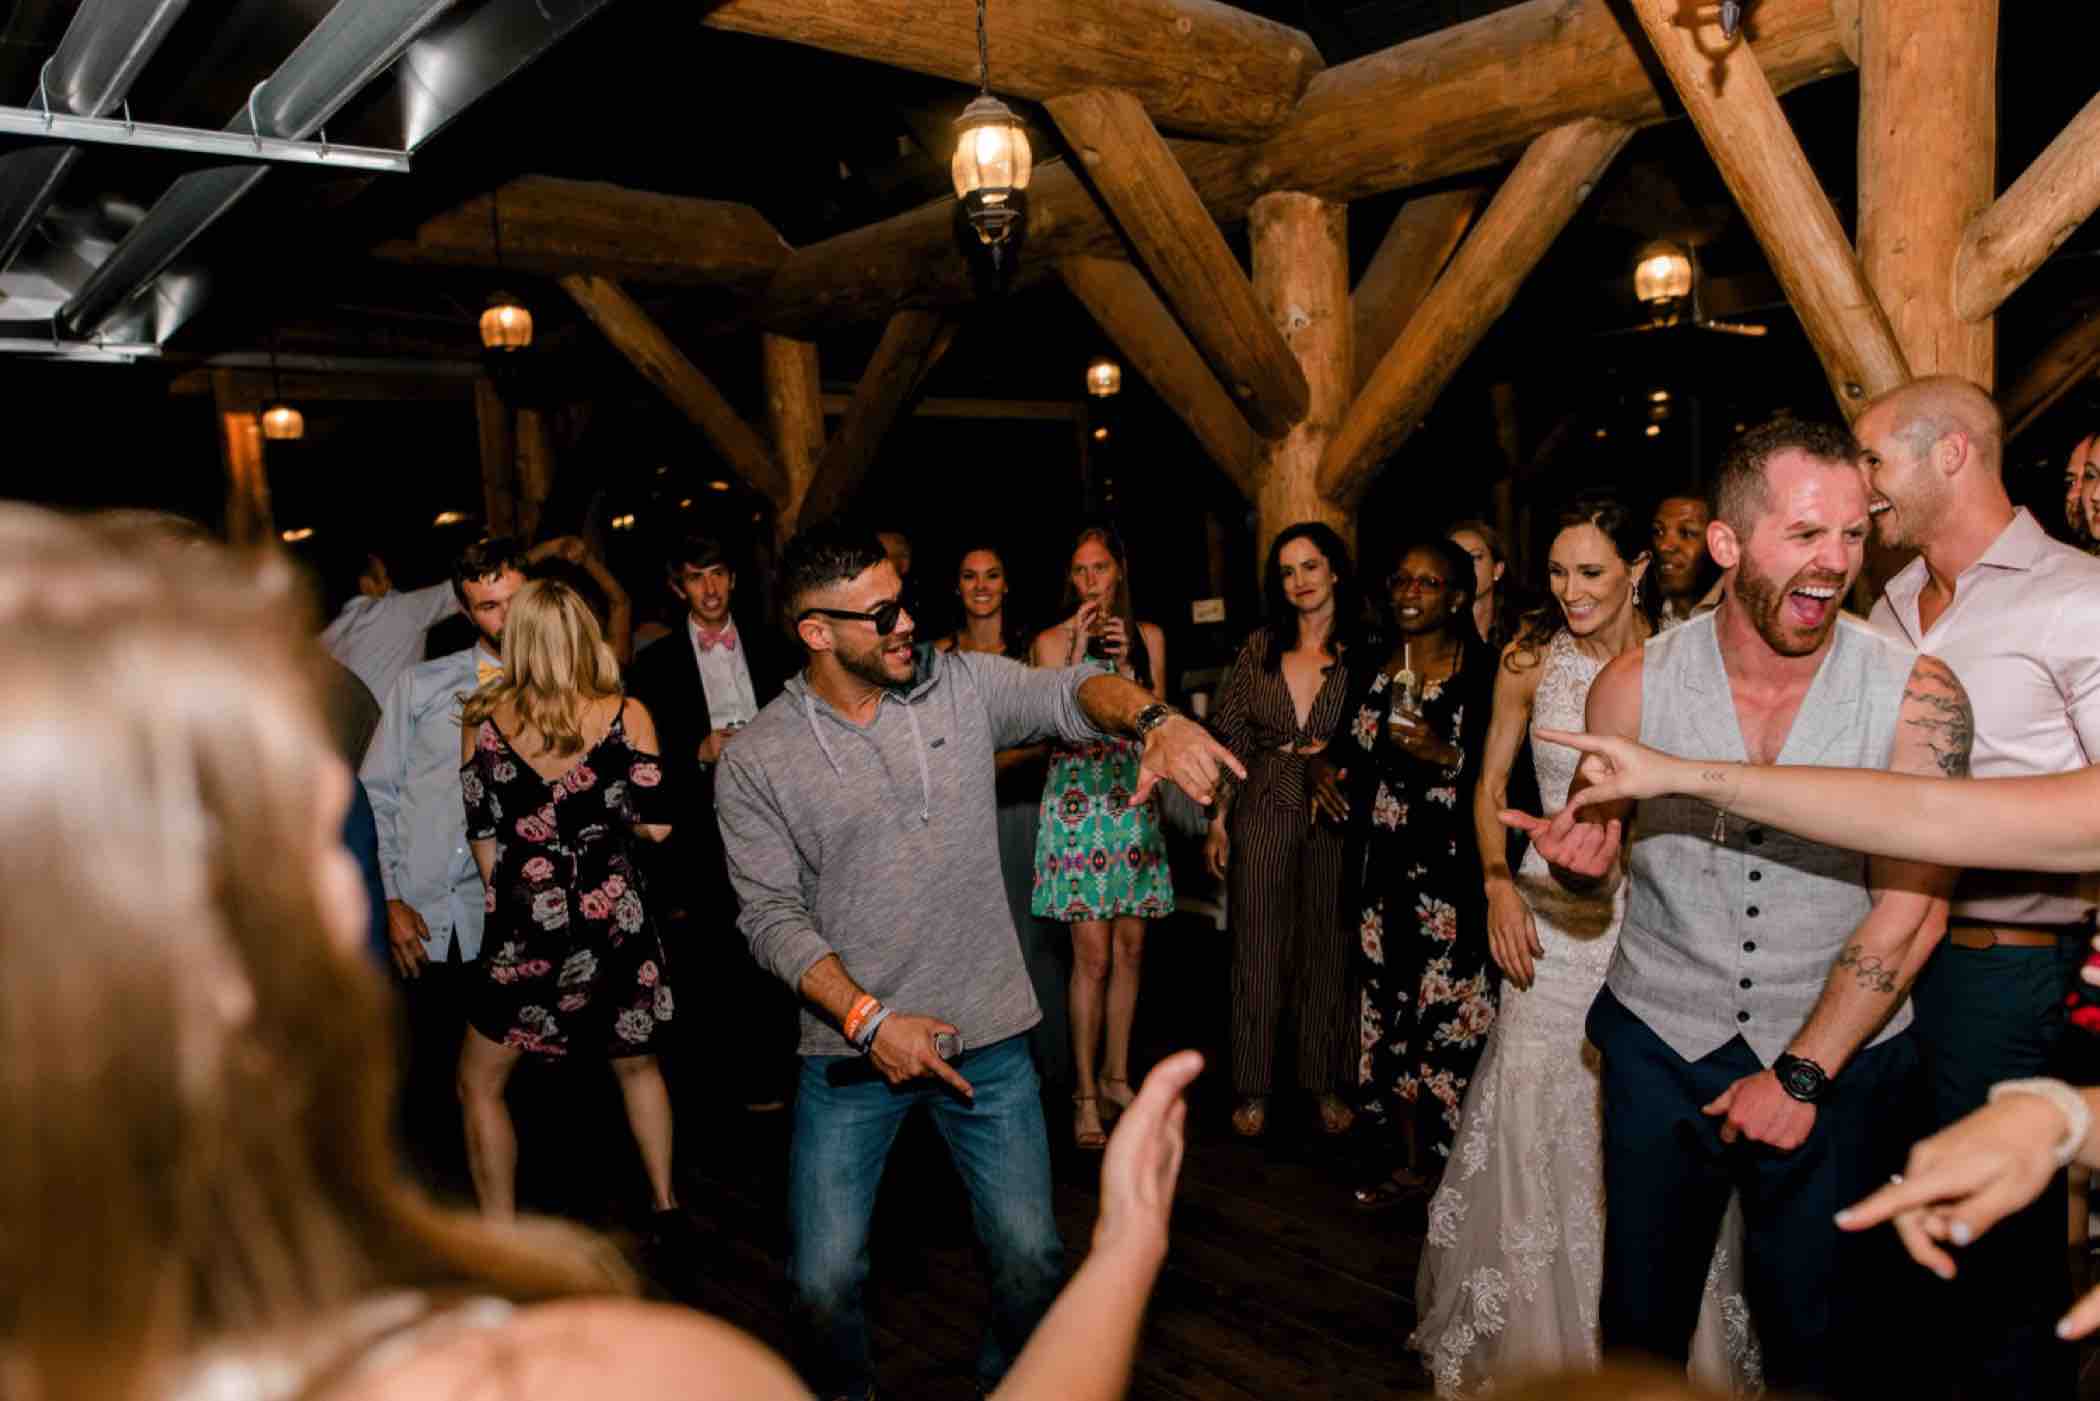 Guests dance at Kris and Sallie's wedding at Piney River Ranch in Vail, Colorado. Photo by Ali and Garrett, Romantic, Adventurous, Nostalgic Wedding Photographers.